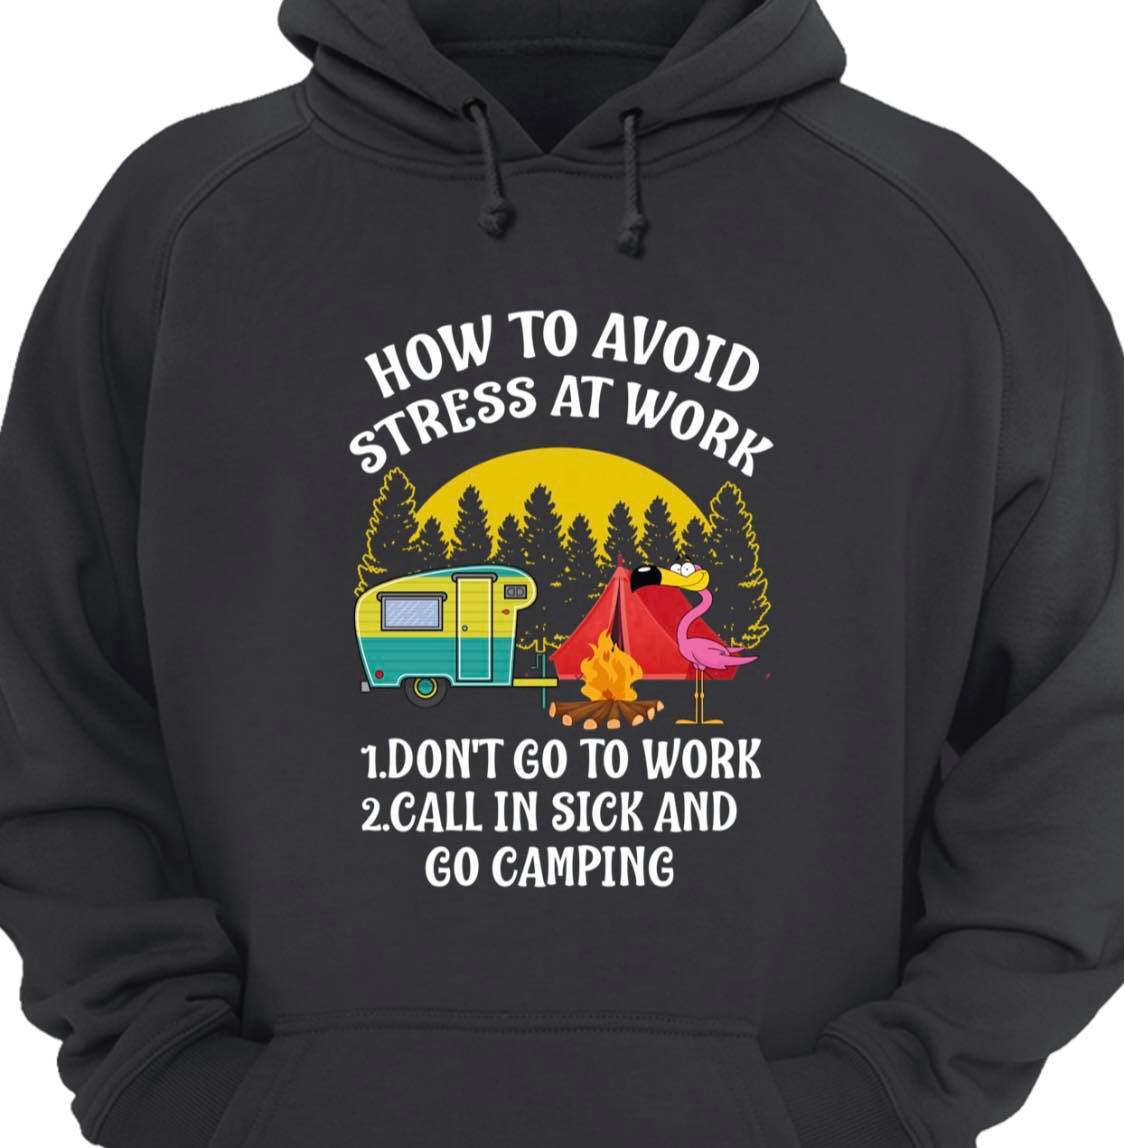 How to avoid stress at work - Don't go to work, call in sick and go camping